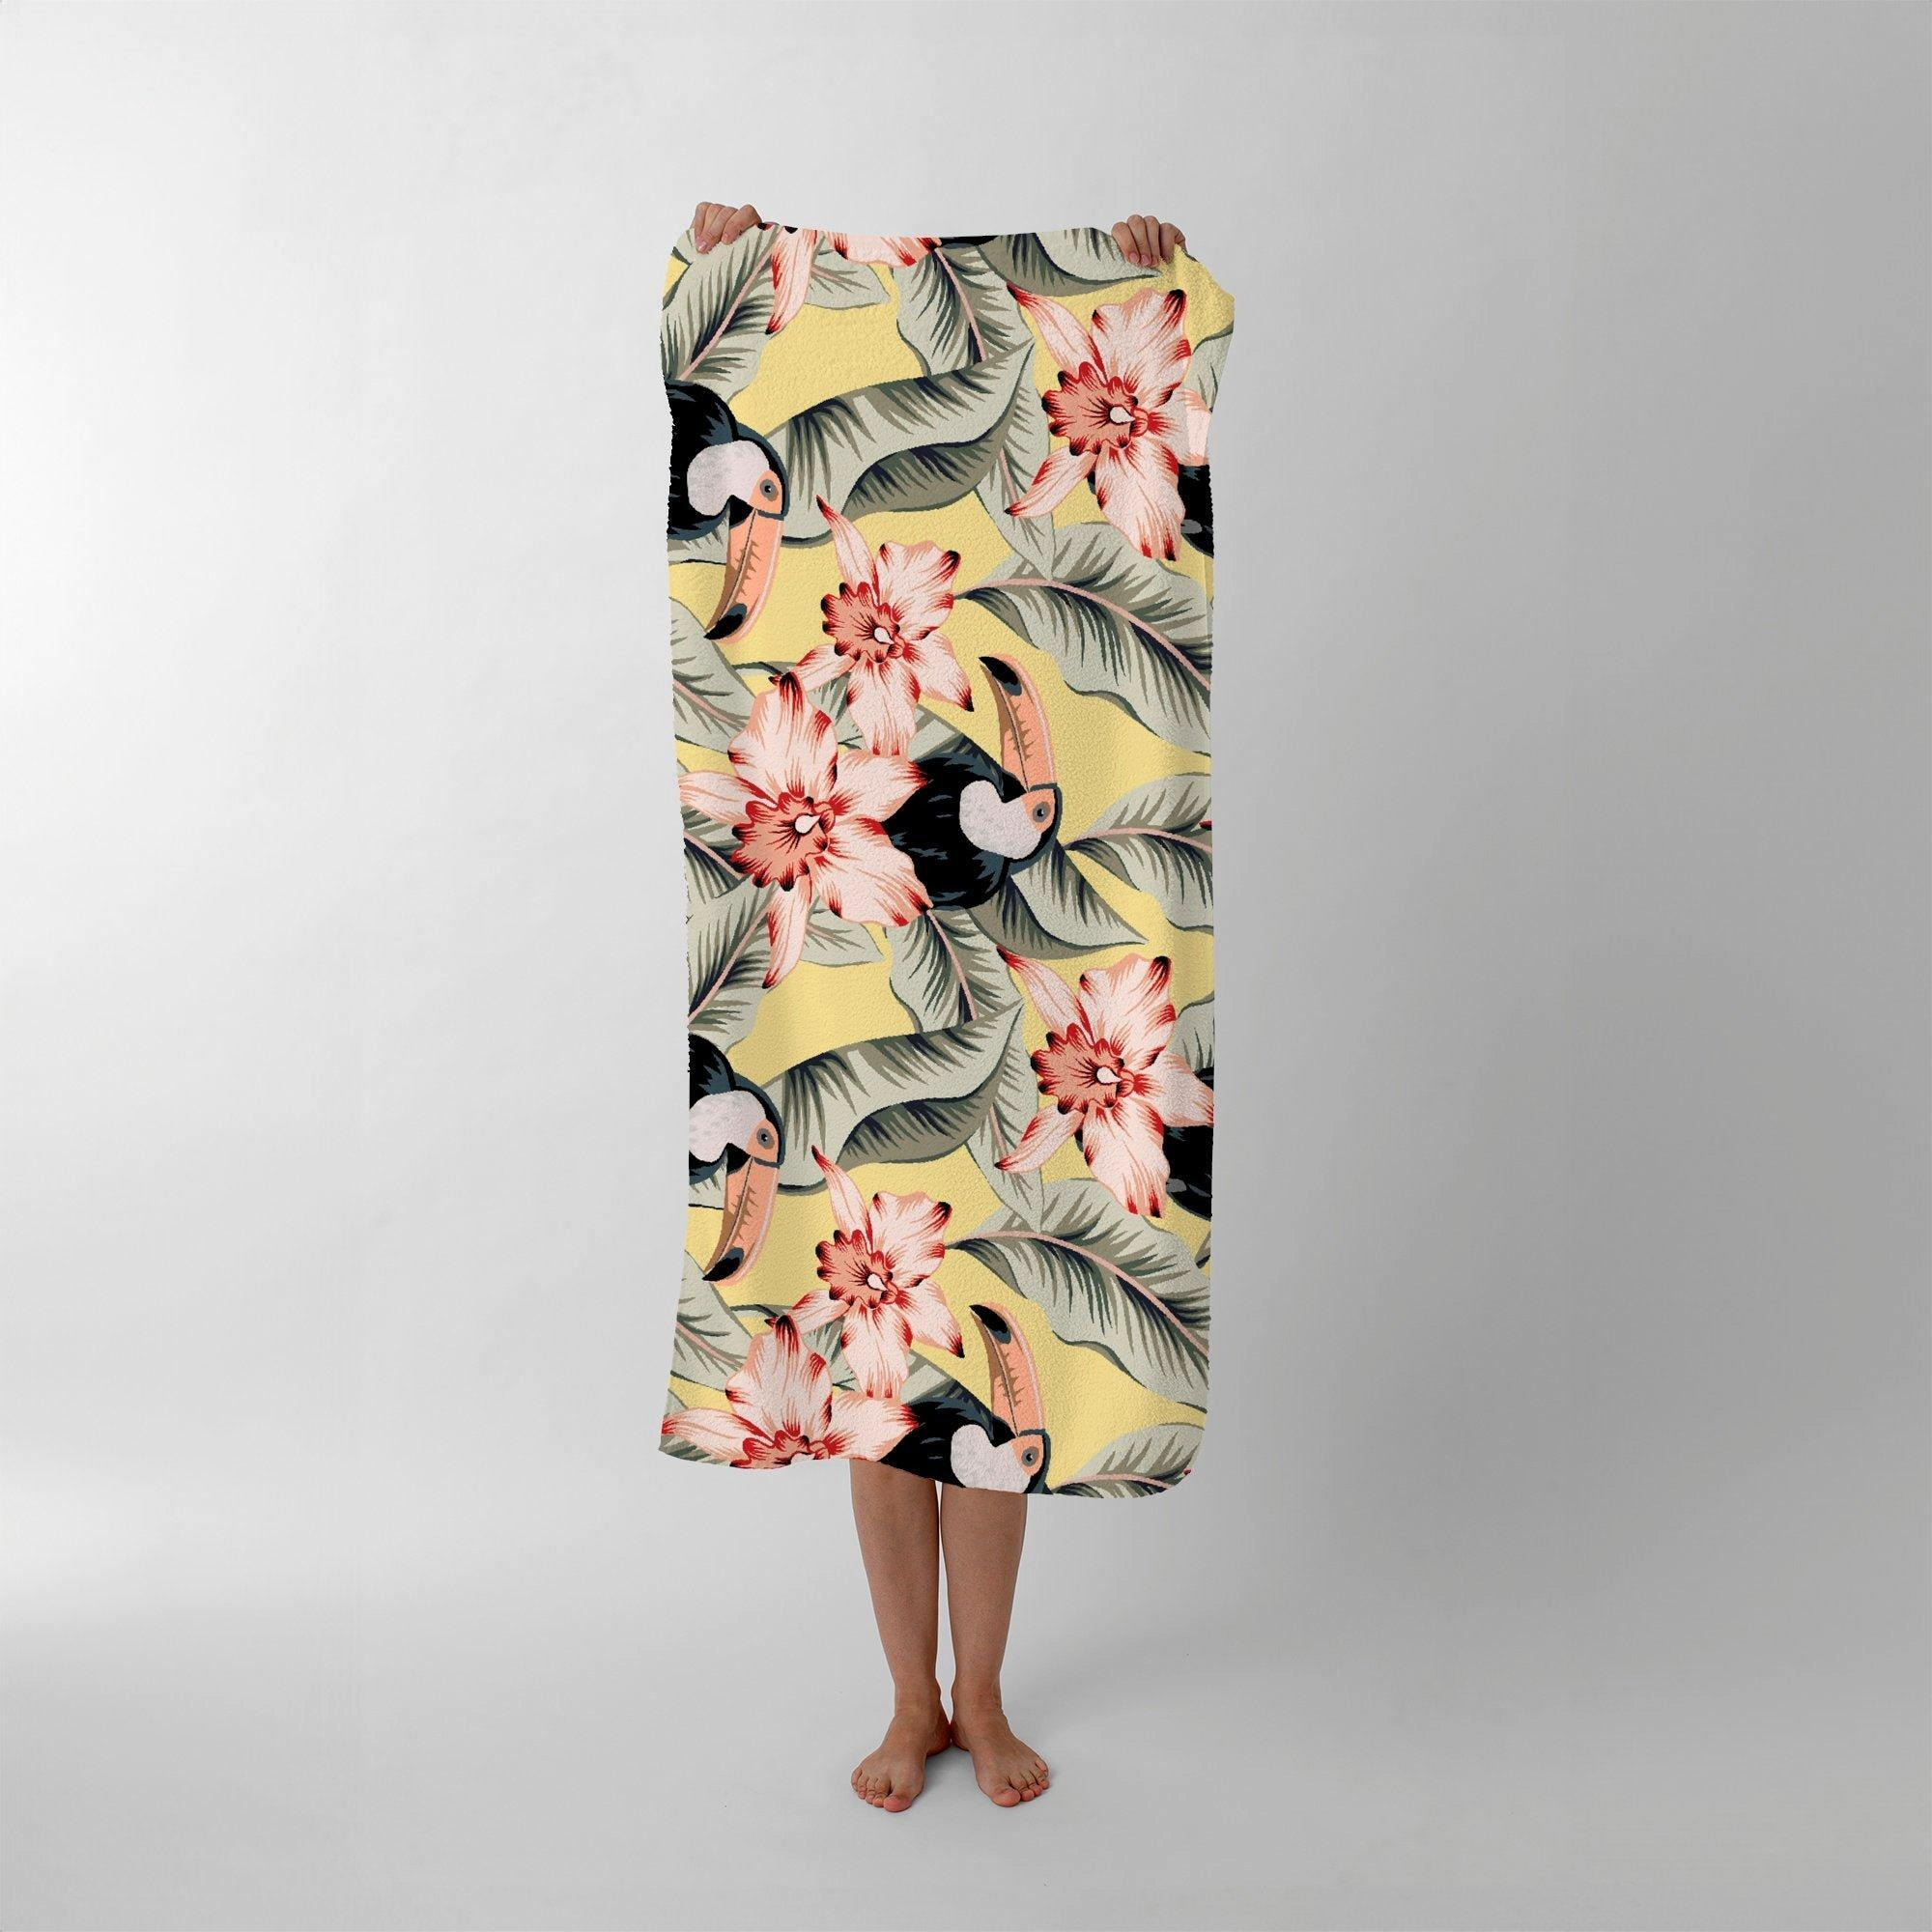 Toucans, Orchids And Palm Leaves Beach Towel - image 1